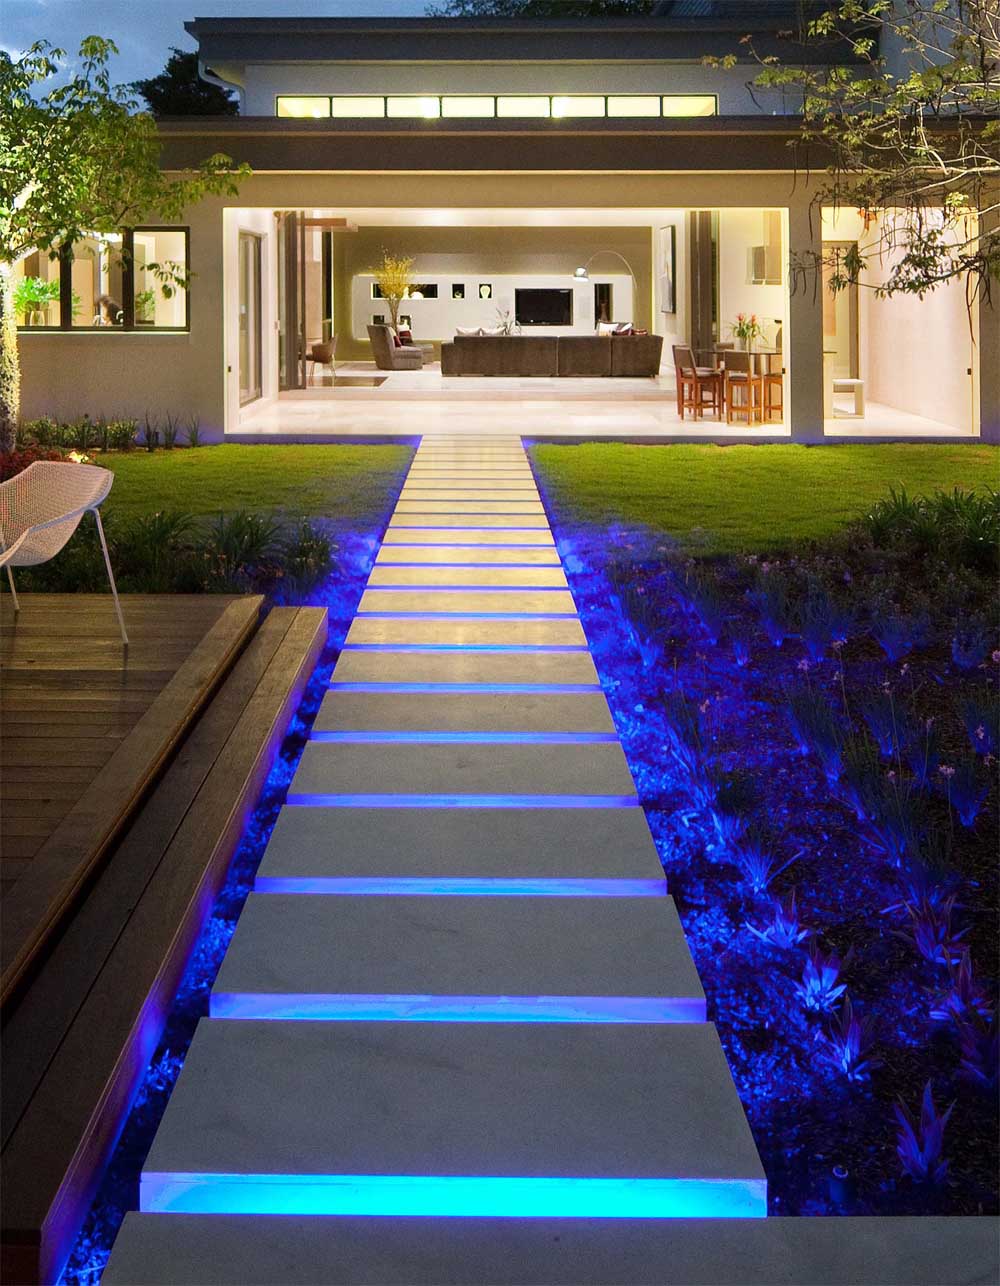 led-lighting-steps LEDs 10 uses in Architecture